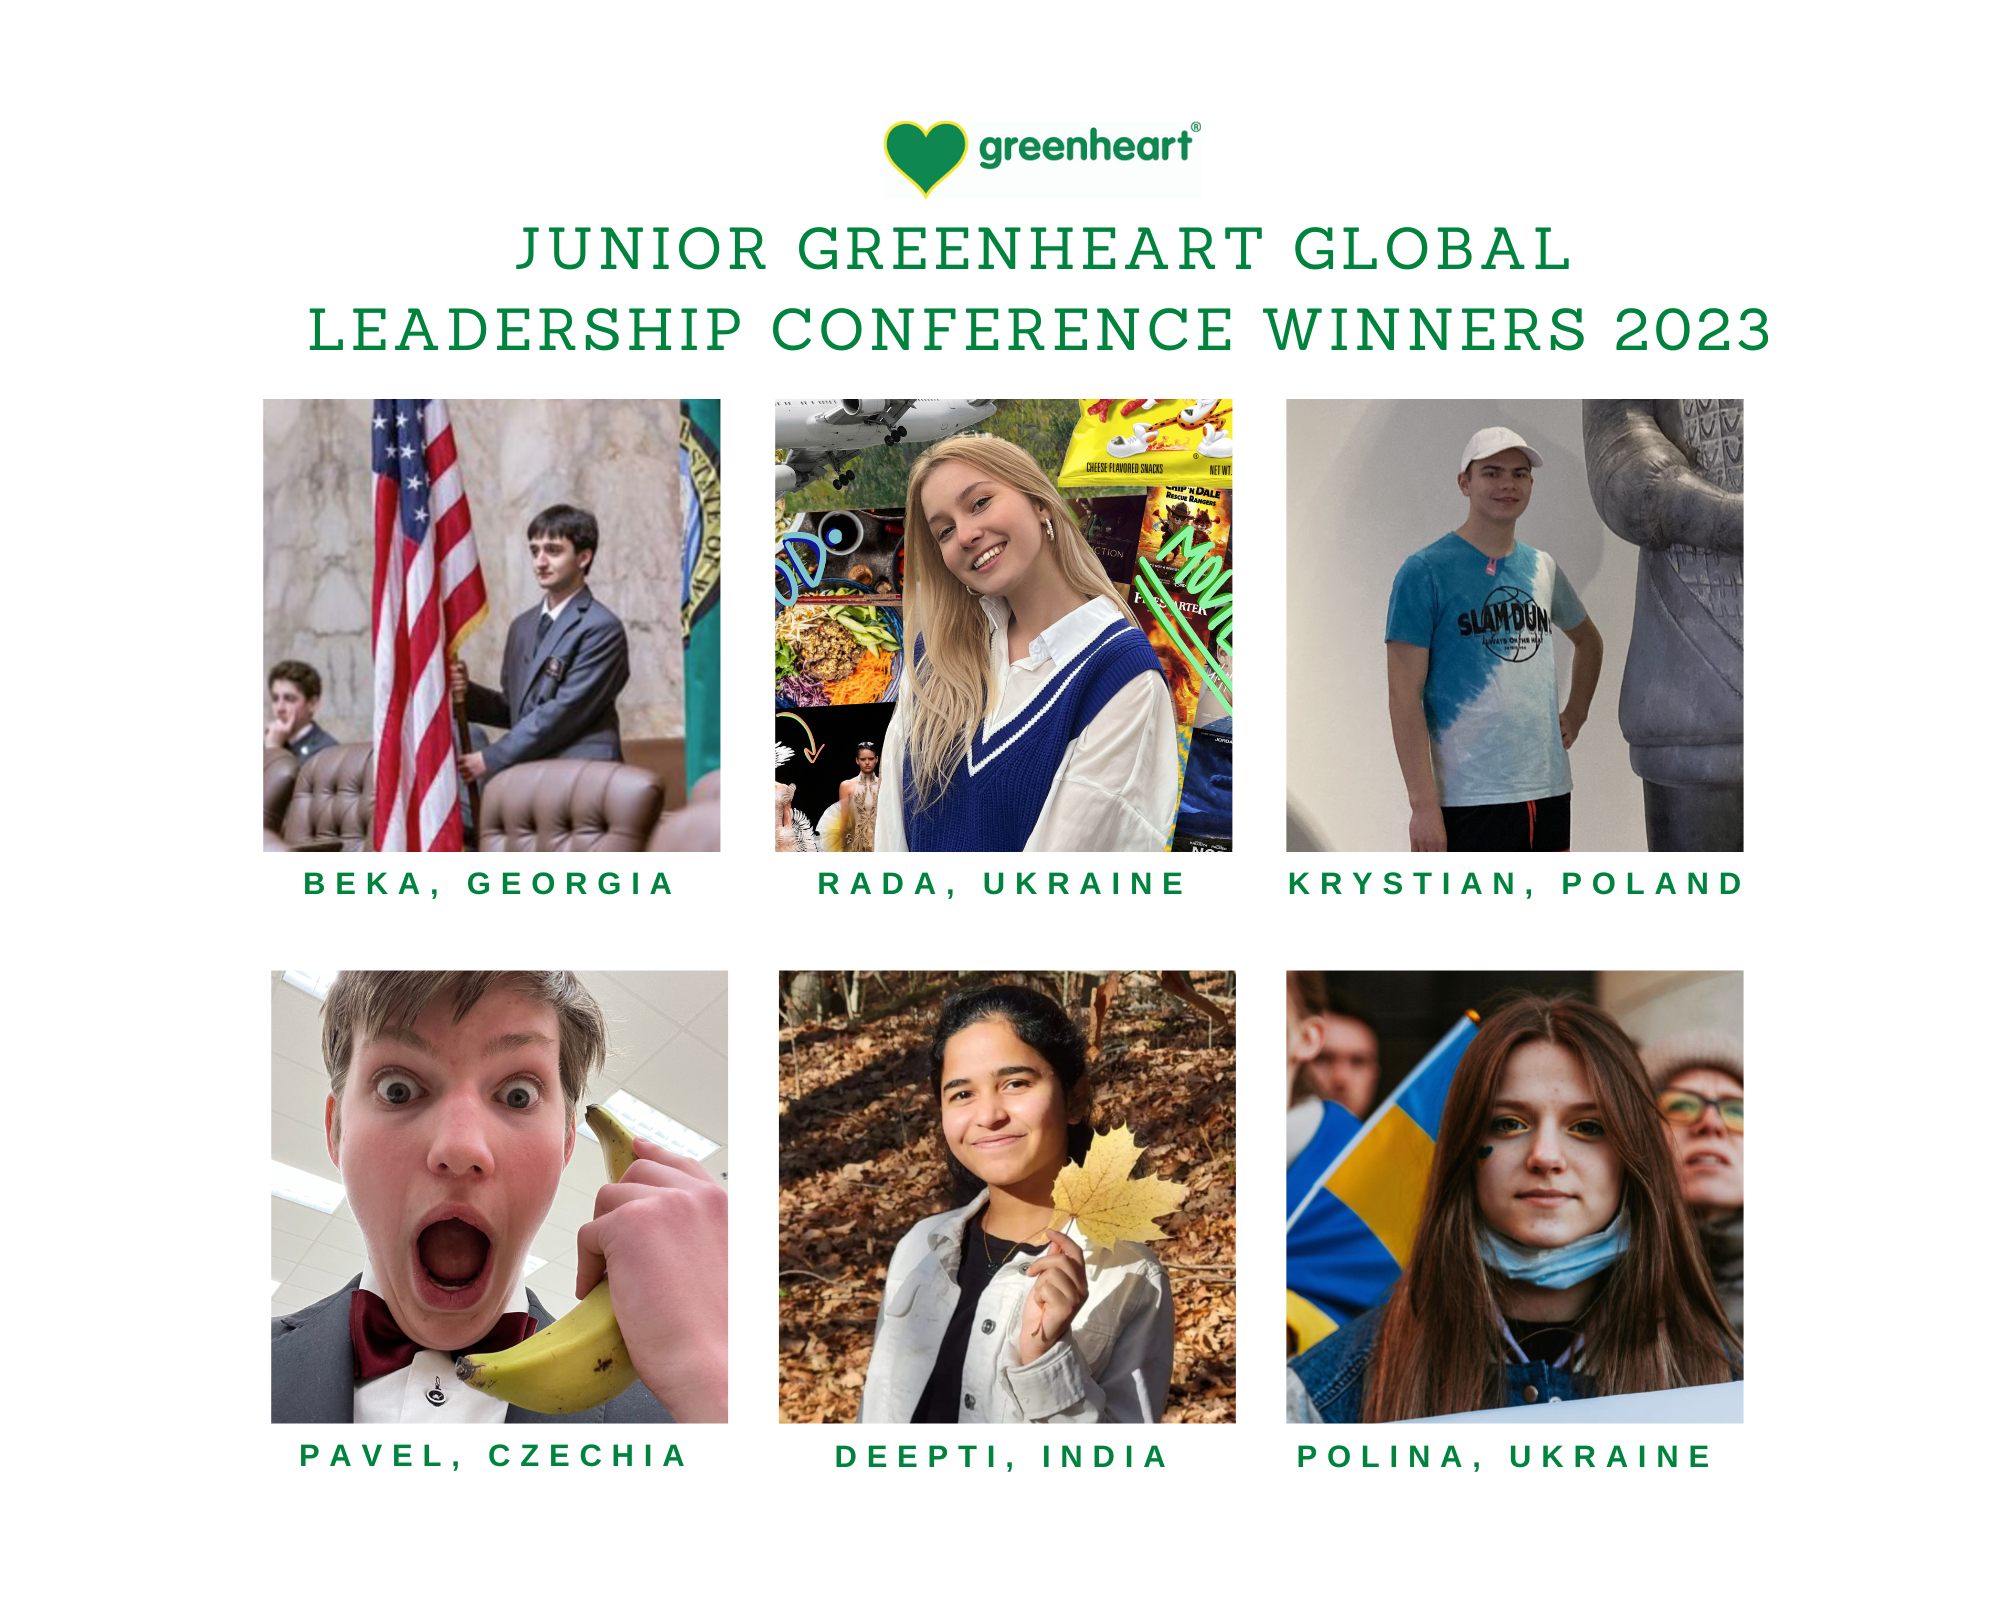 The Junior Greenheart Global Leaders Conference is back in Chicago this May 2023!